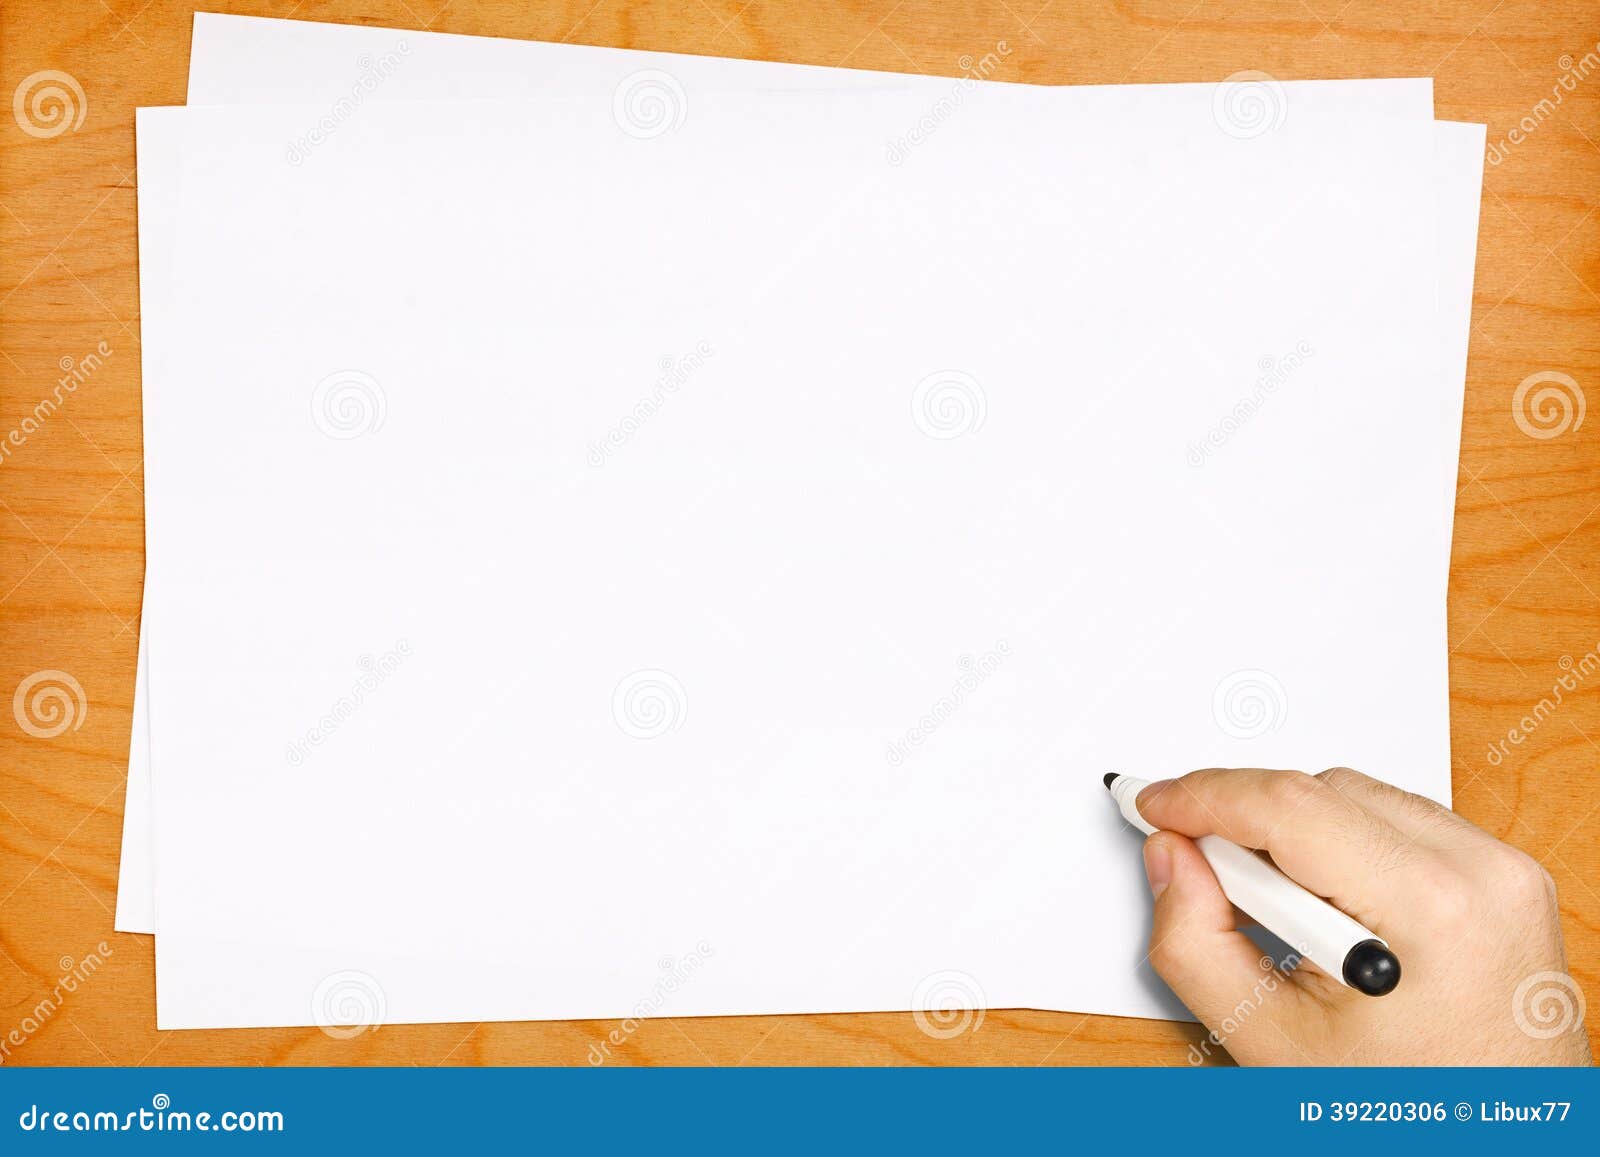 Male Hand Writing on Blank White Sheets Stock Photo - Image of blank ...